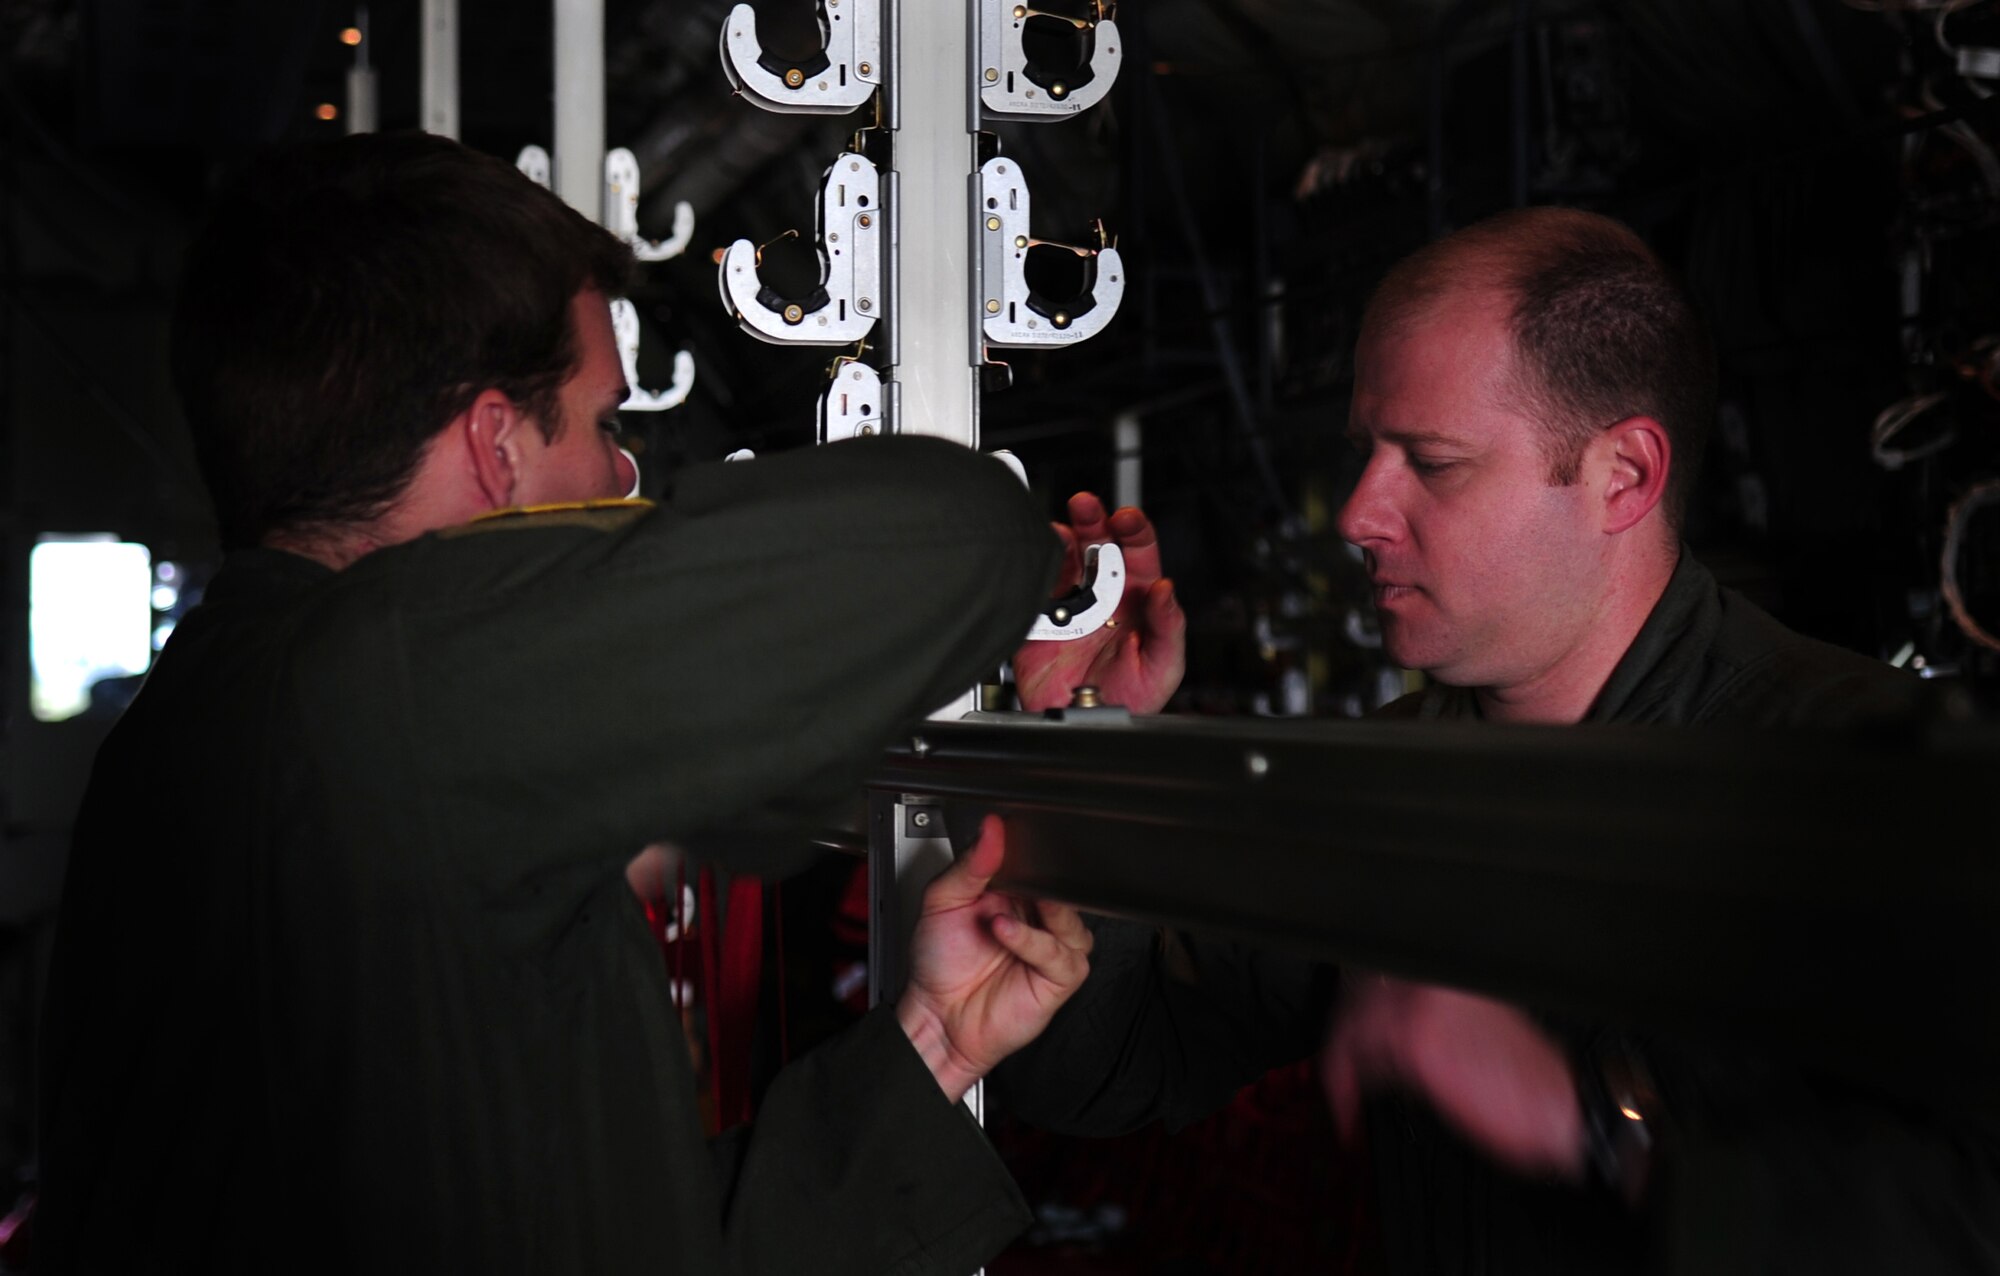 U.S. Air Force Staff Sgt. Brett Hunter and Tech. Sgt. Scott Schlup, 37th Airlift Squadron loadmasters, assemble additional jump seats in a C-130J in preparation of Romanian Air Force members for a paratroop jump during the joint exercise Carpathian Summer, Otopeni Airlift Base, Romania, May 12, 2010. Carpathian Summer 2010 was an exercise in which the Romanian Air Force invited members of the U.S. military to train with them on their soil and air space, to observe and practice, firsthand, operations in action. This exercise was designed to build partnerships between these nations in an effort to work together more efficiently during real world scenarios. (U.S. Air Force Photo by Staff Sgt. Jocelyn Rich)